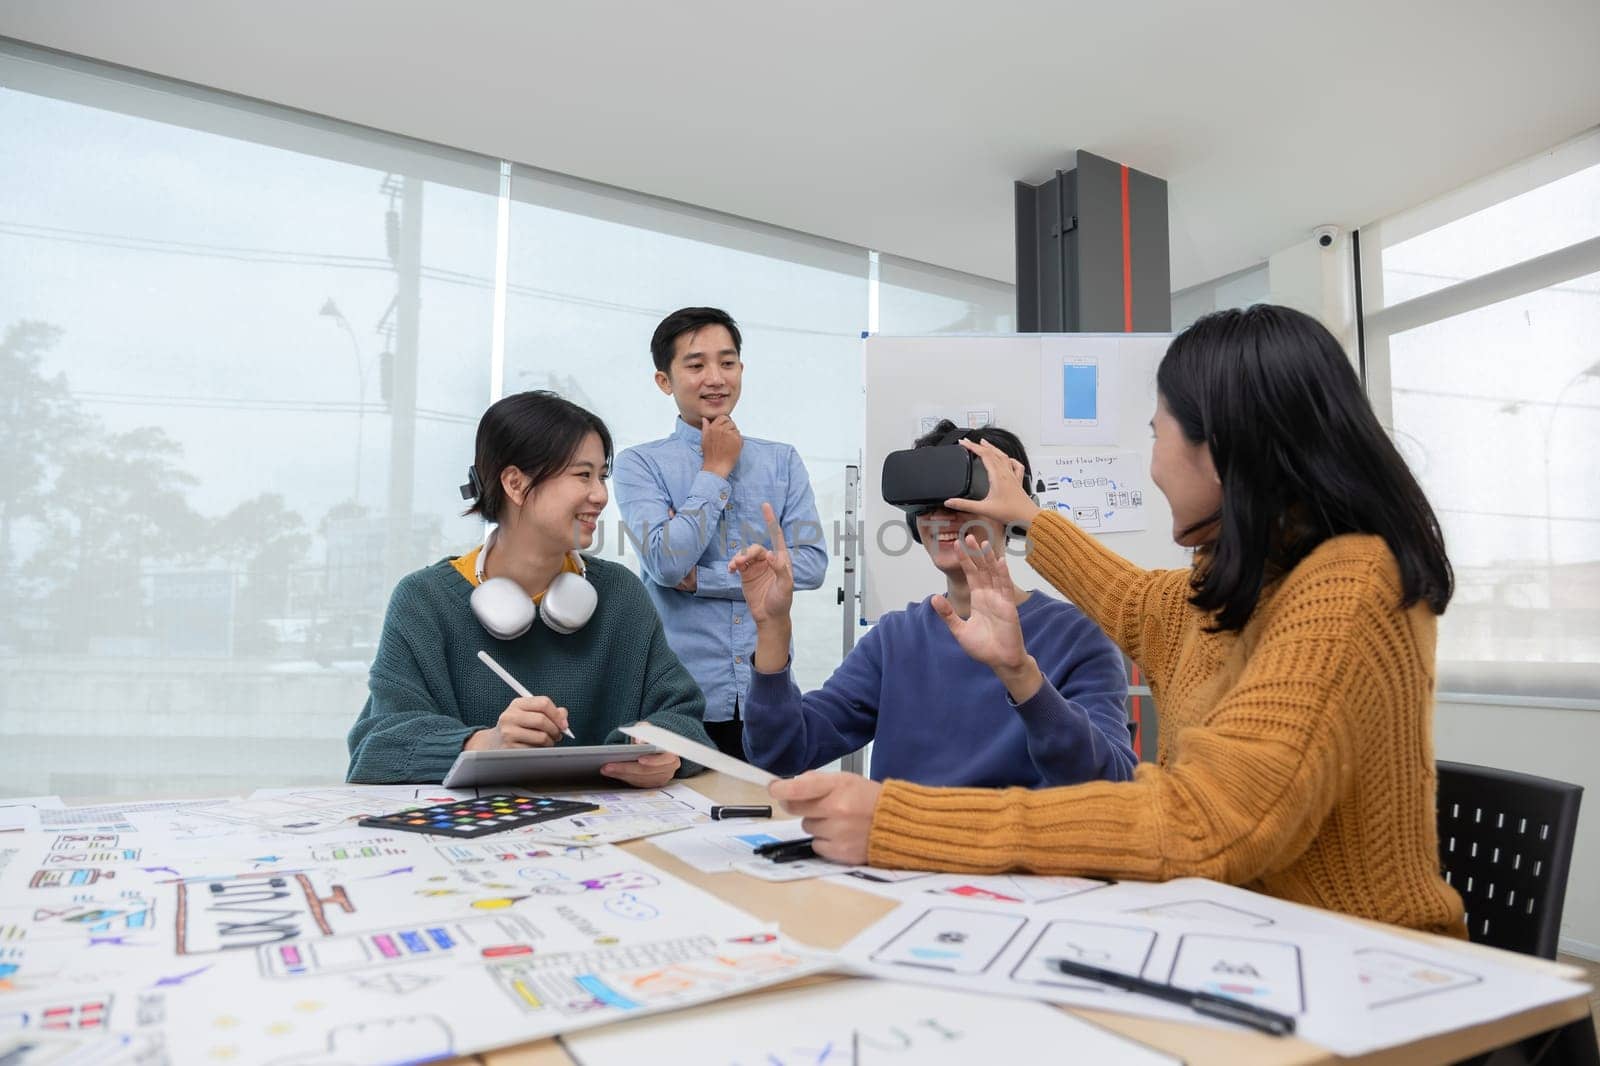 The program developer team held a brainstorming meeting to design and develop software for smart VR glasses that is in the process of updating the system. by wichayada